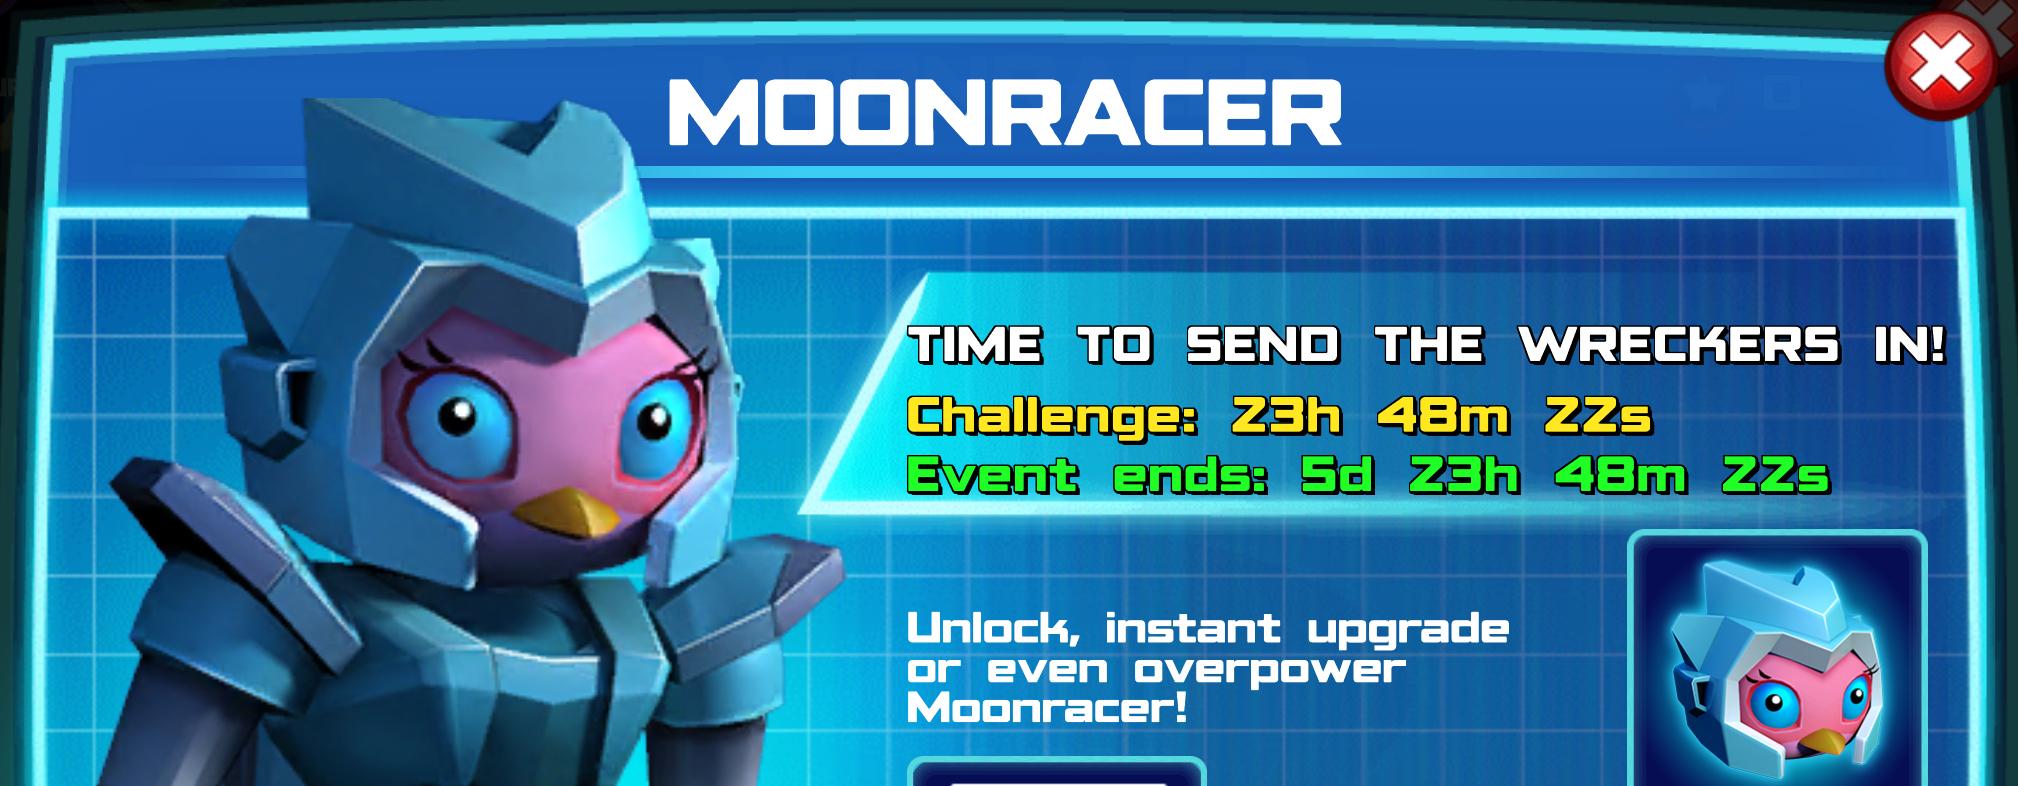 (Part of) The event banner for Moonracer